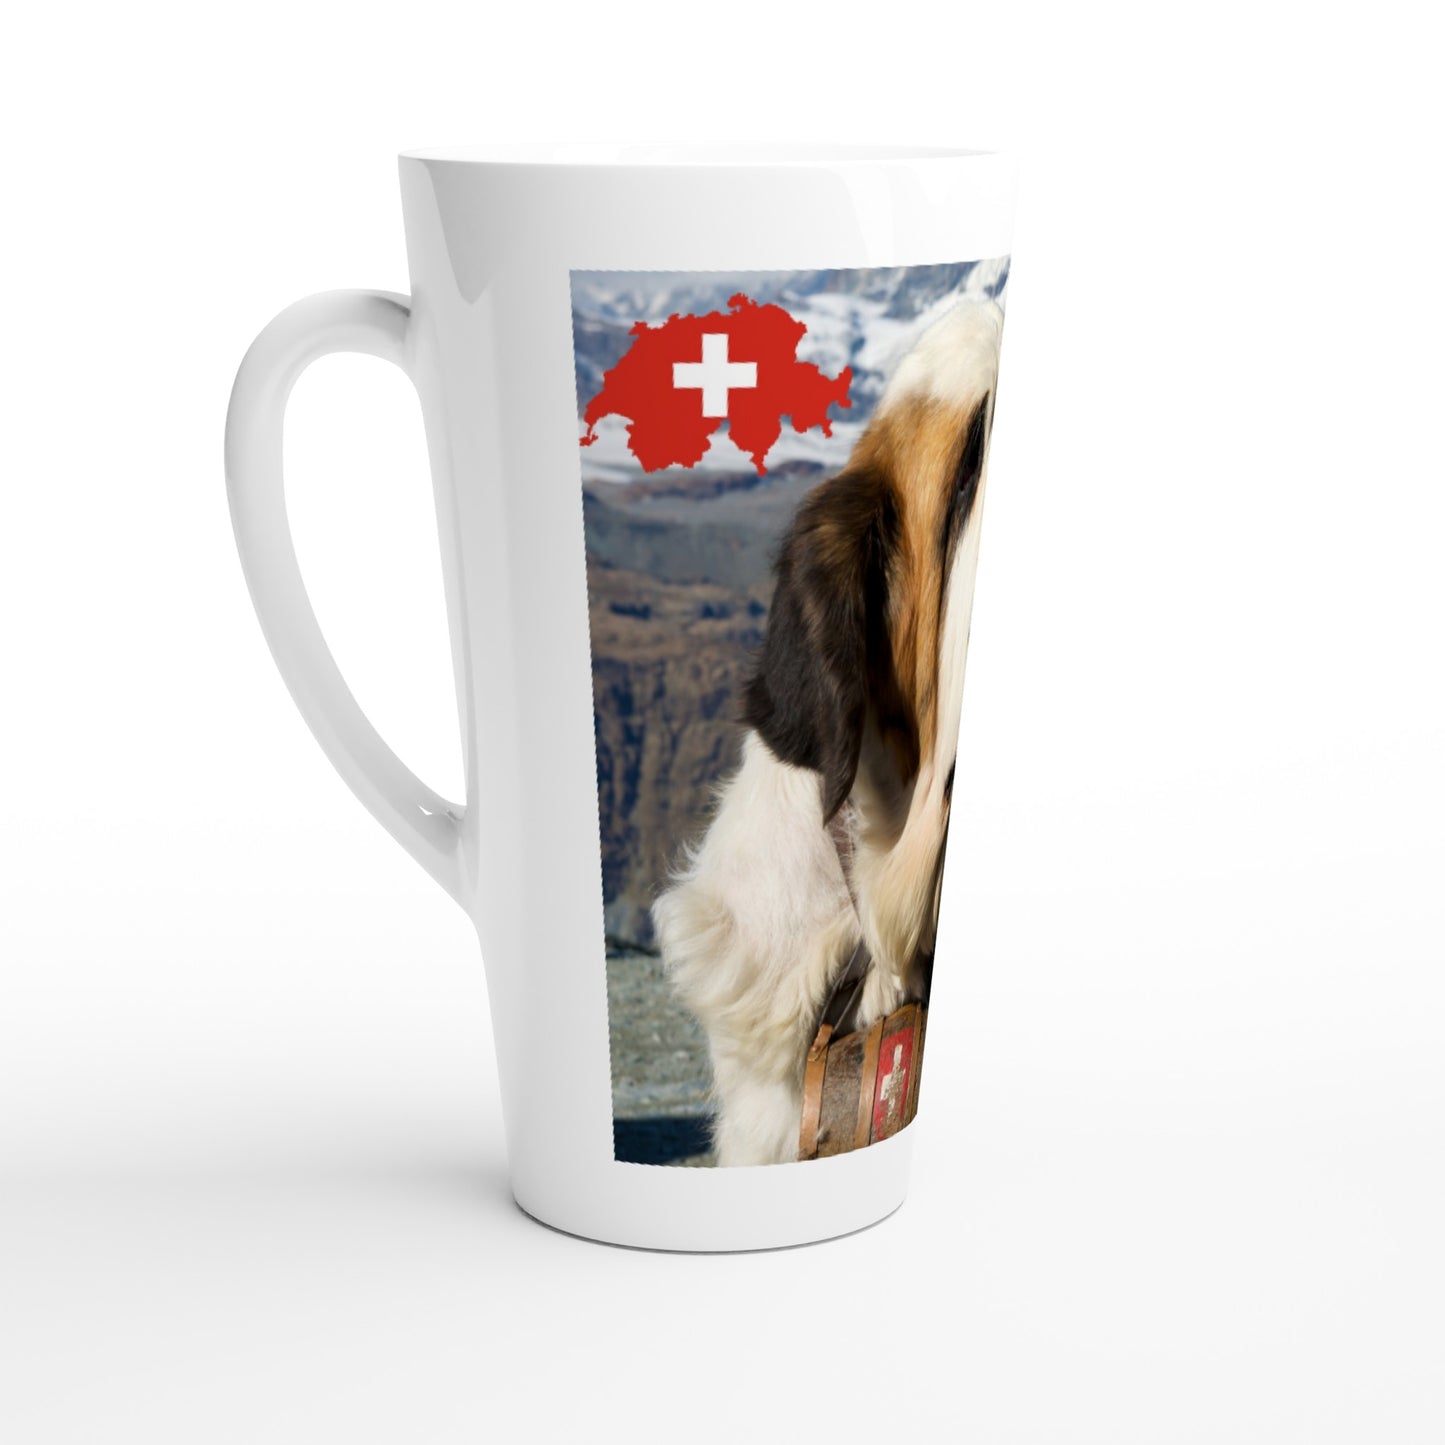 Swiss Edition White Latte Cup